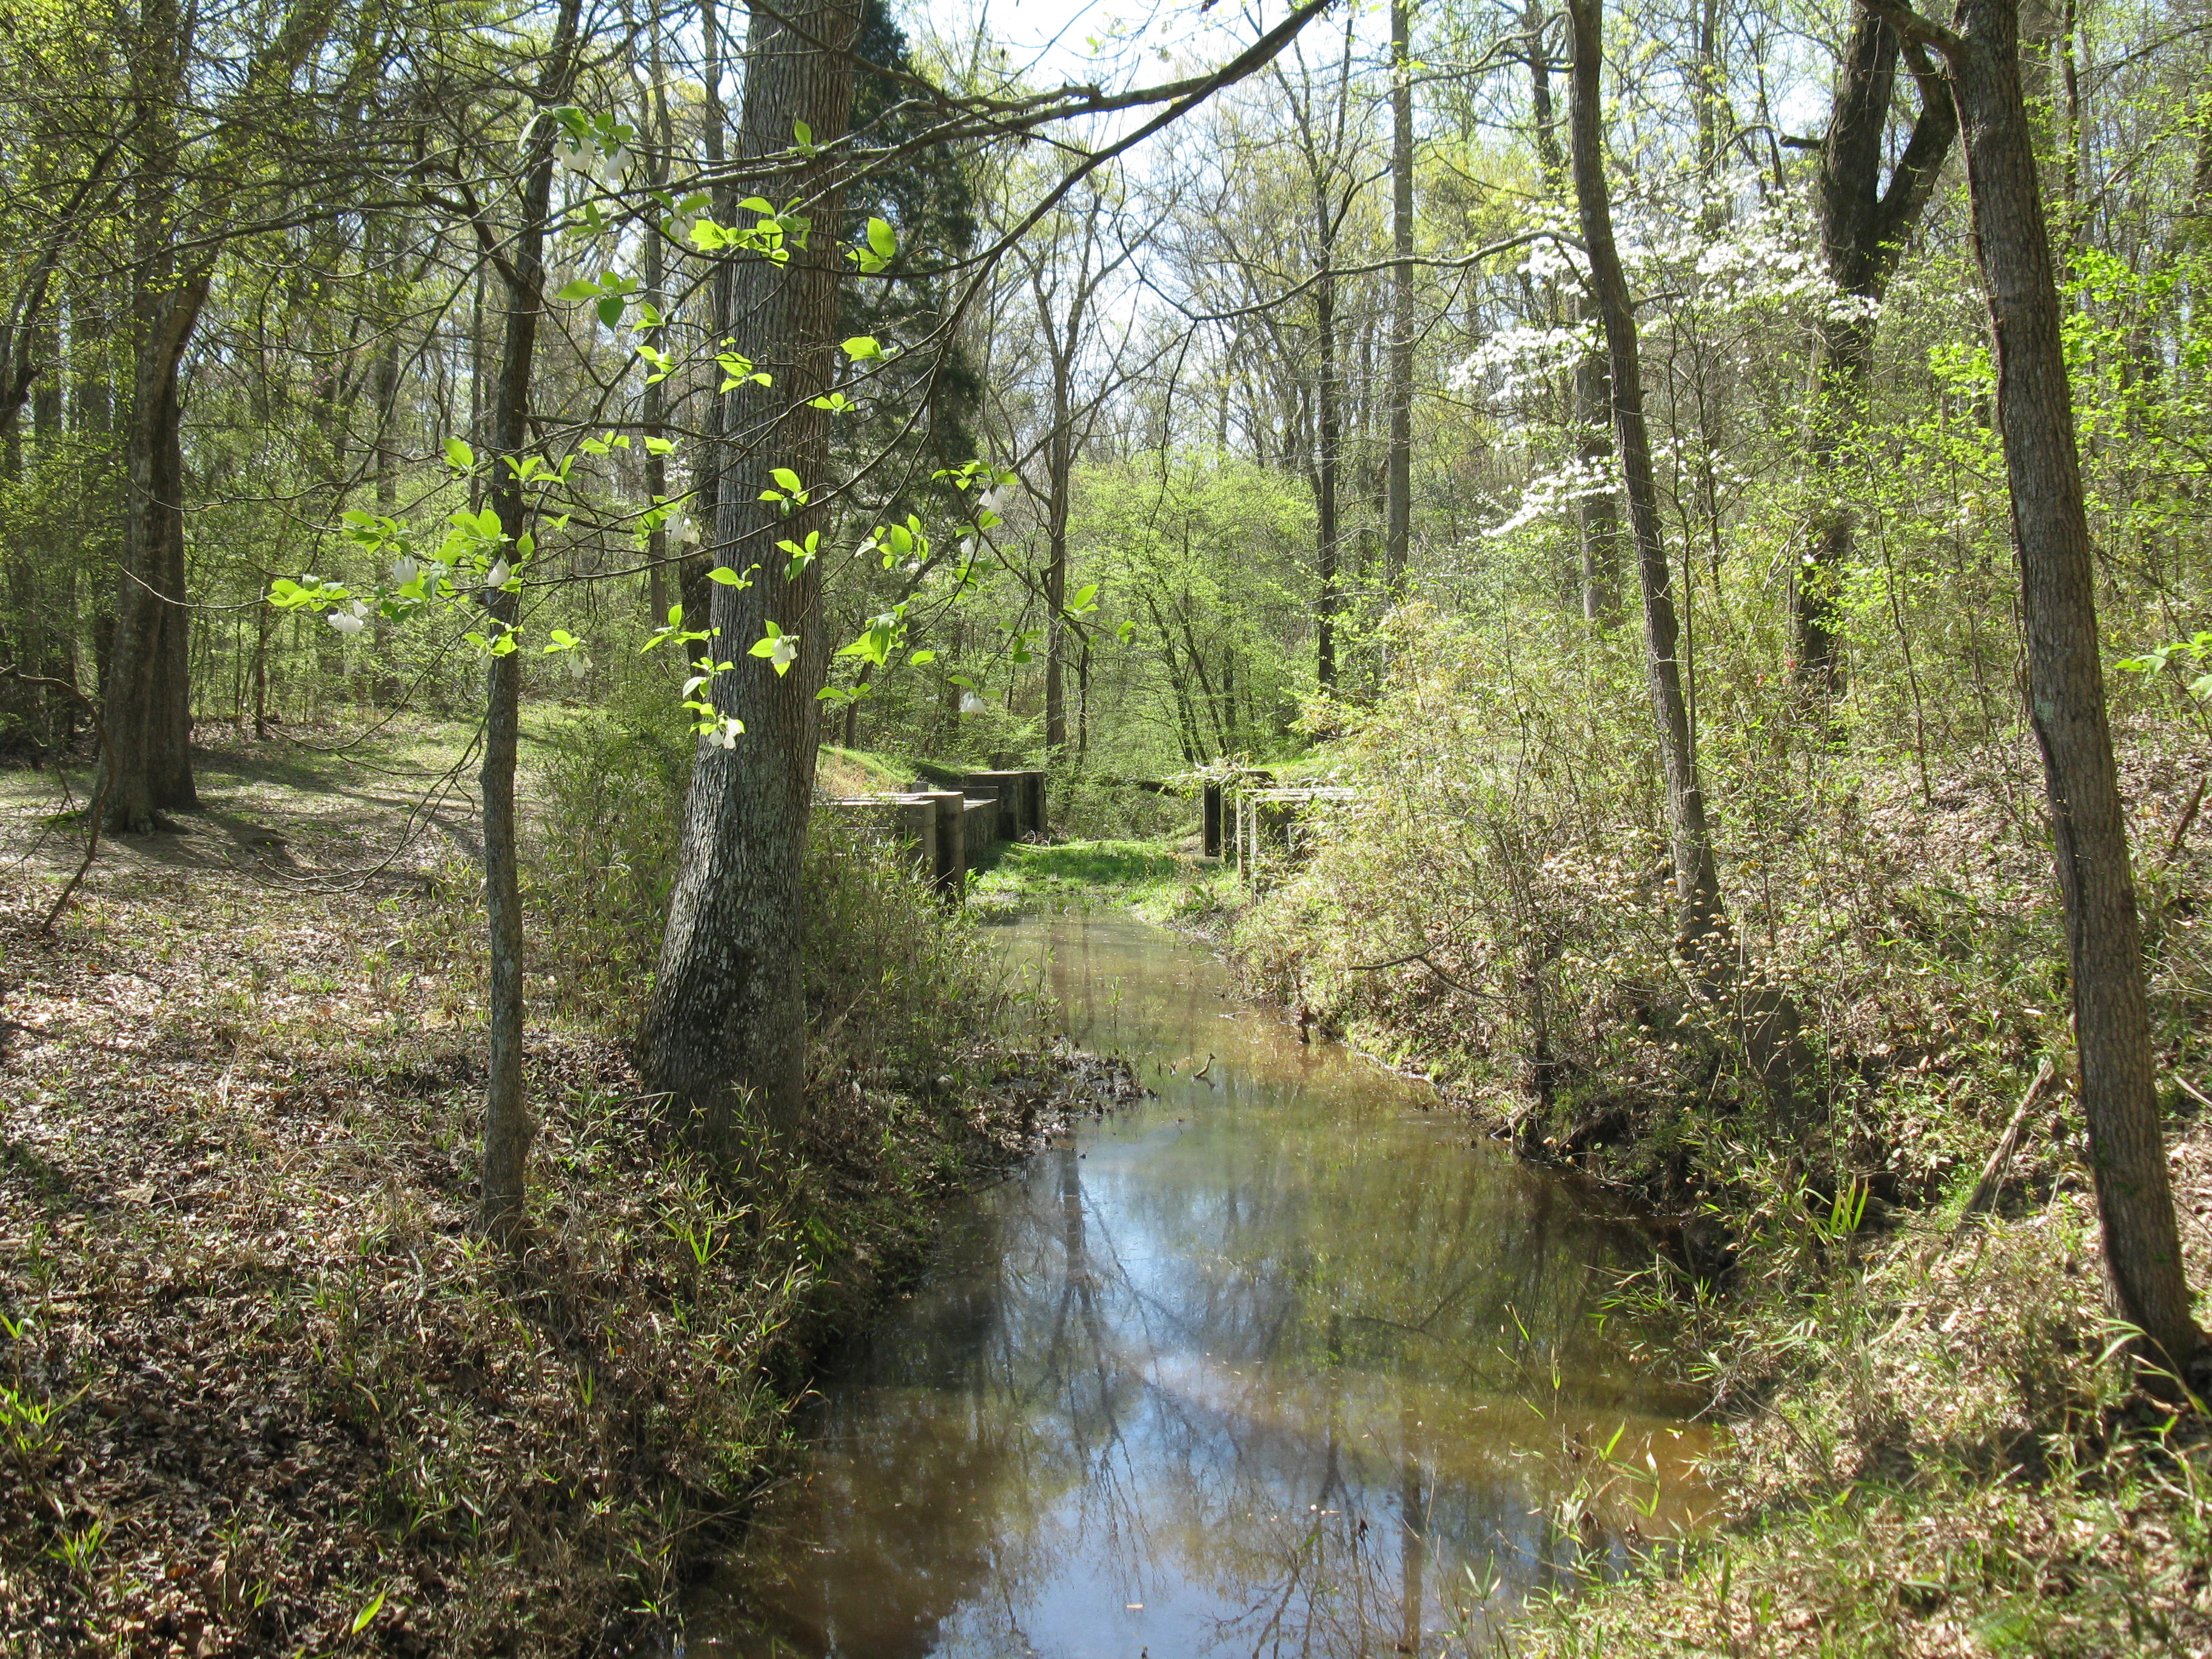 Figure 3. The upstream end of Landsford Canal.